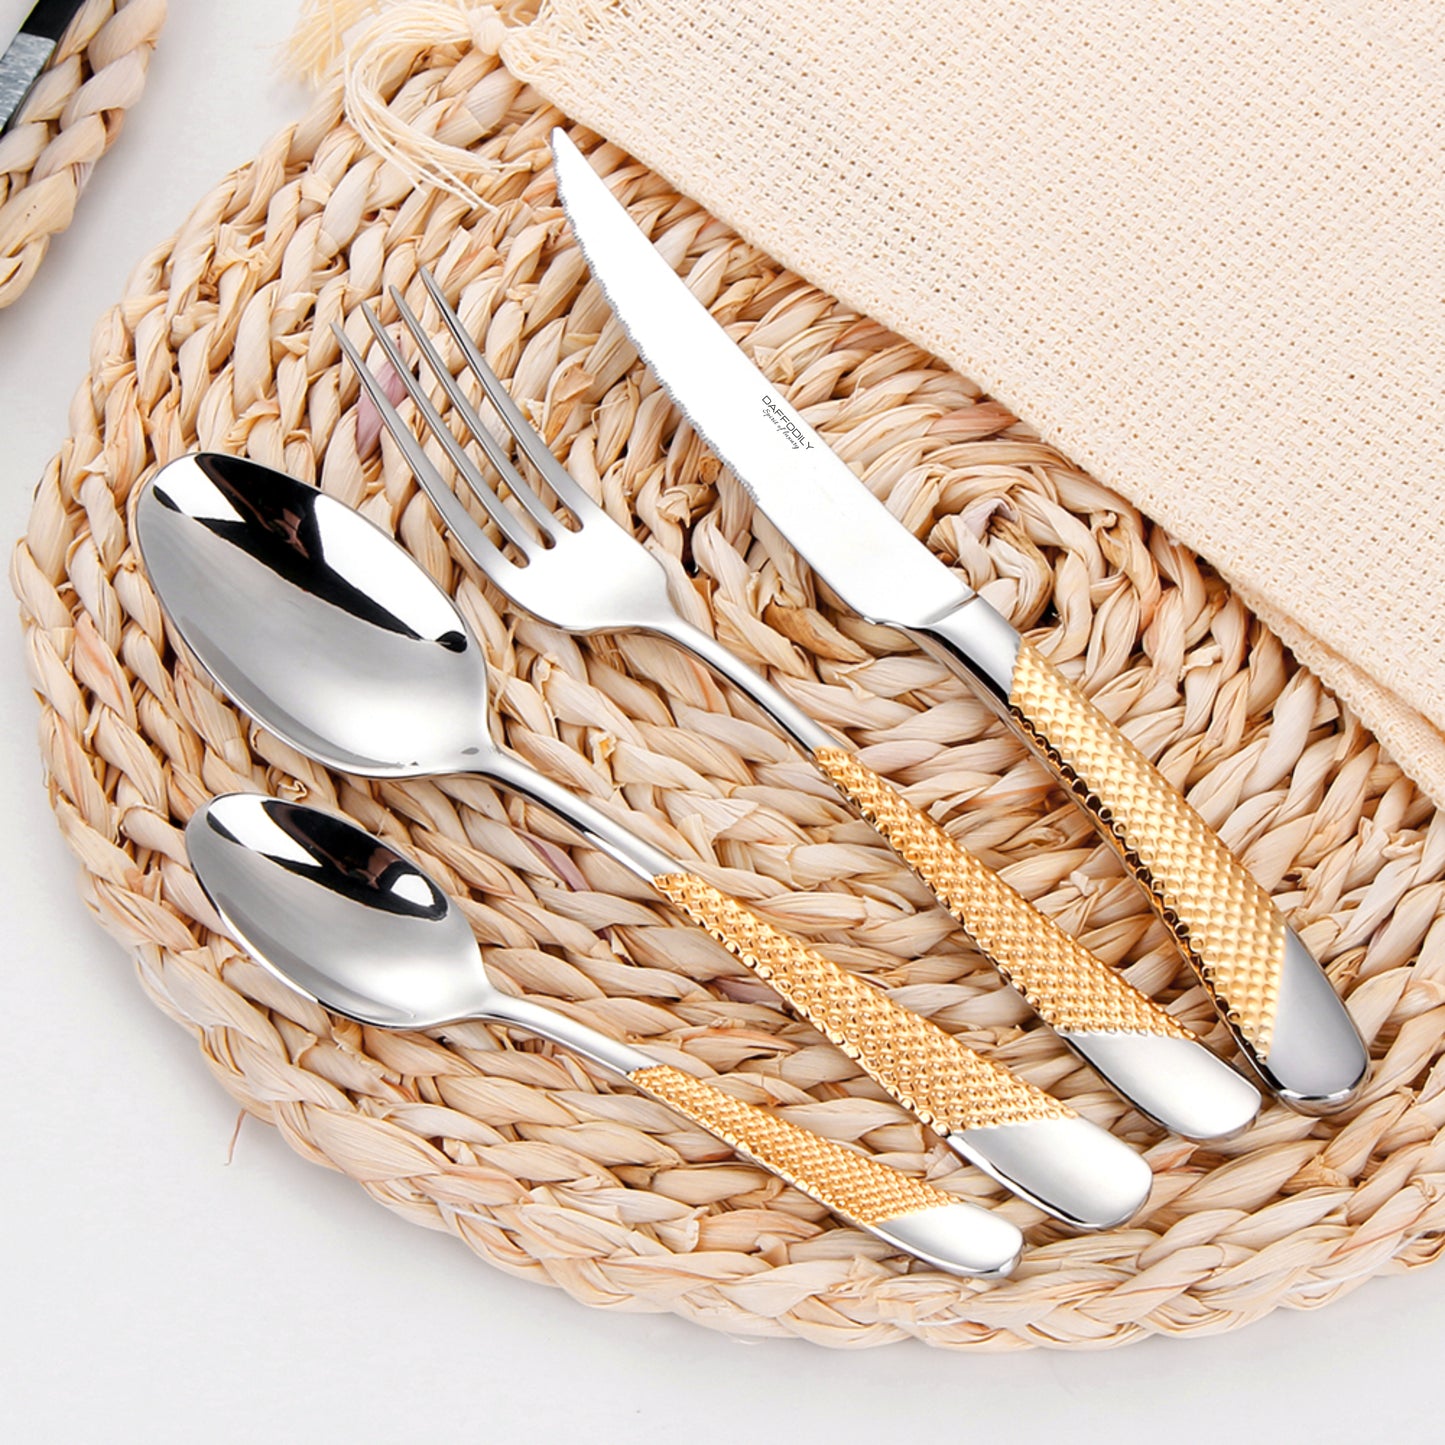 Elegant gold cutlery set for a luxurious dining experience